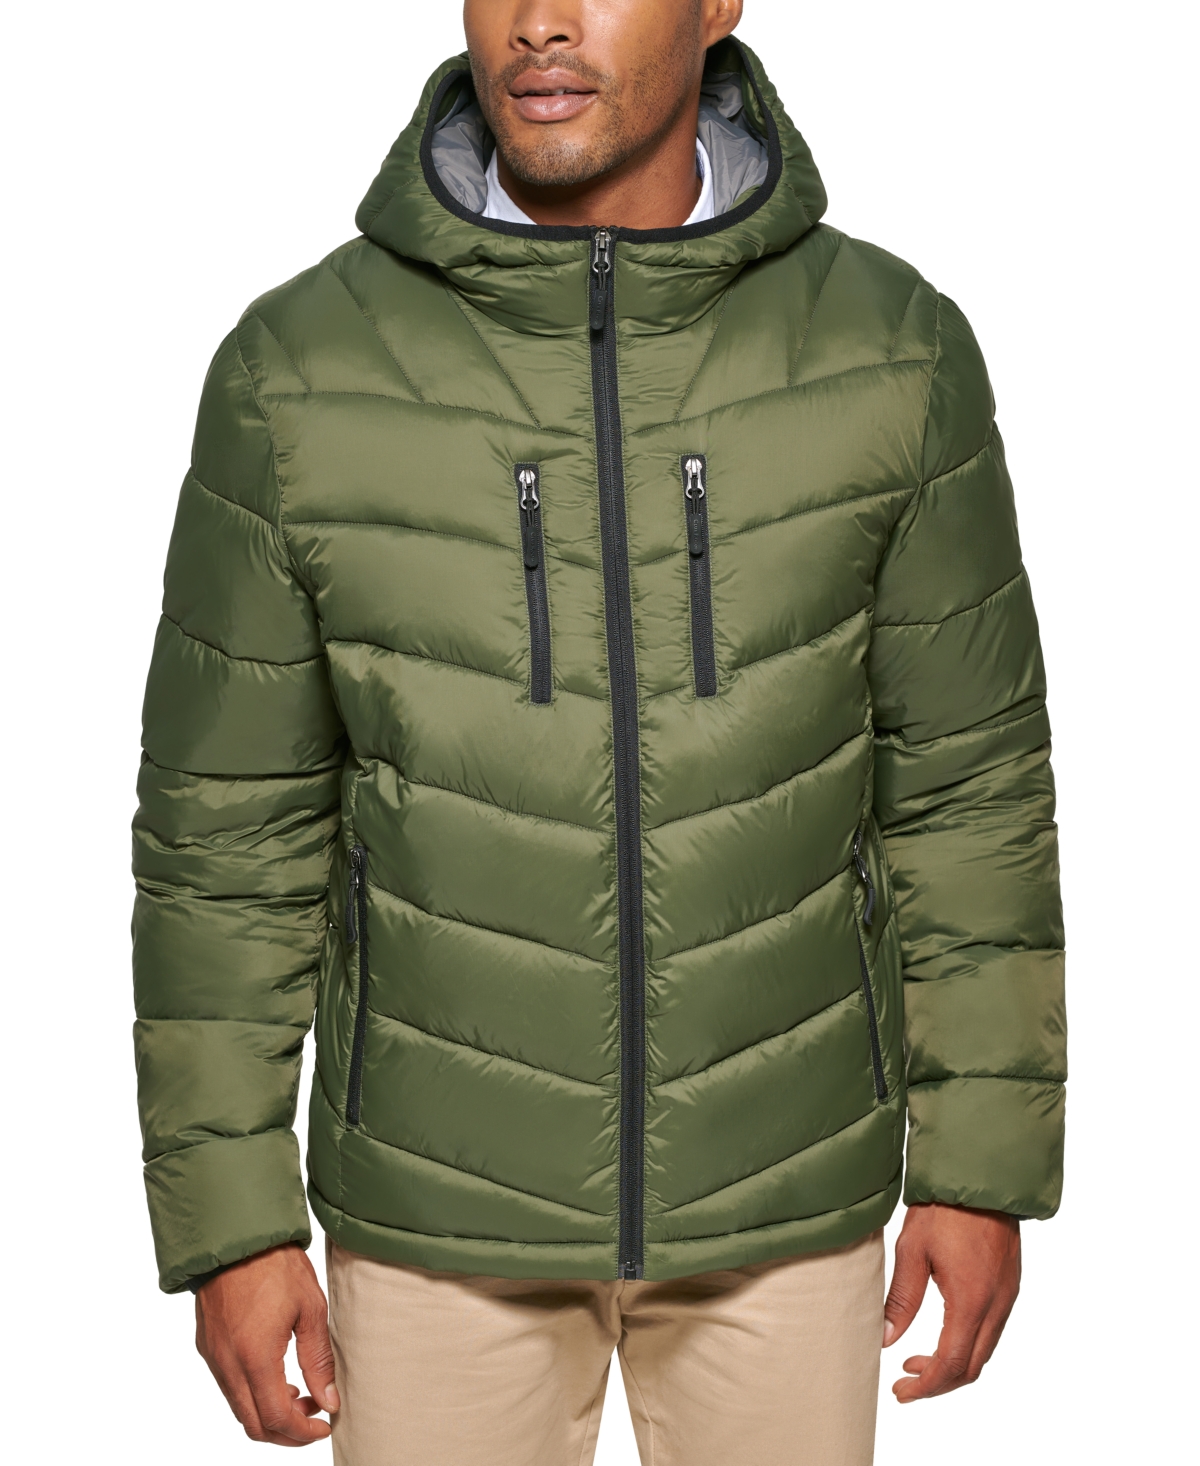 Men's Chevron Quilted Hooded Puffer Jacket, Created for Macy's - Camouflage